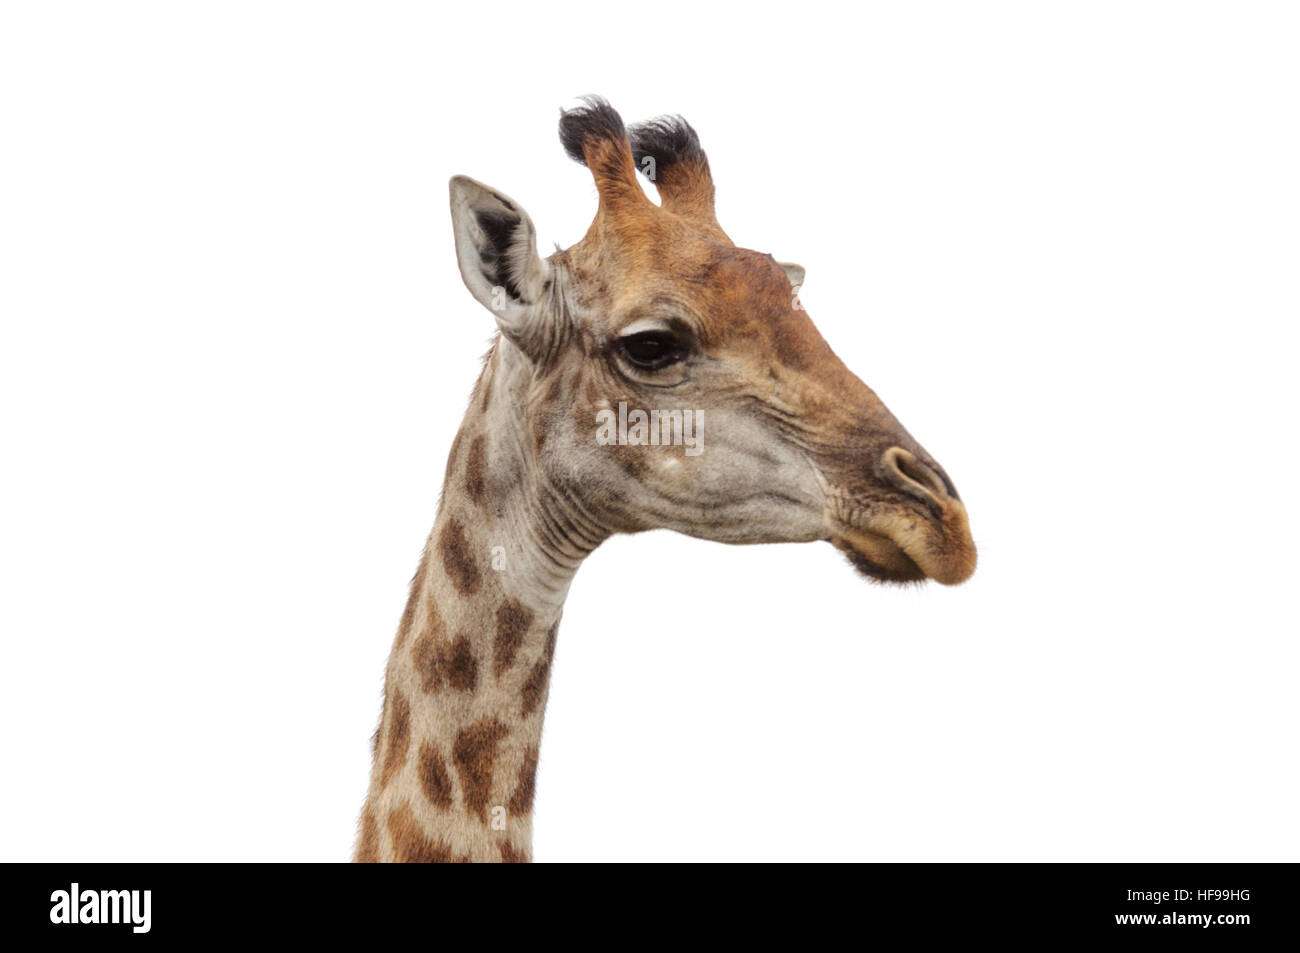 Close-up portrait of a South African giraffe (Giraffa giraffa giraffa), also known as the Cape giraffe Stock Photo